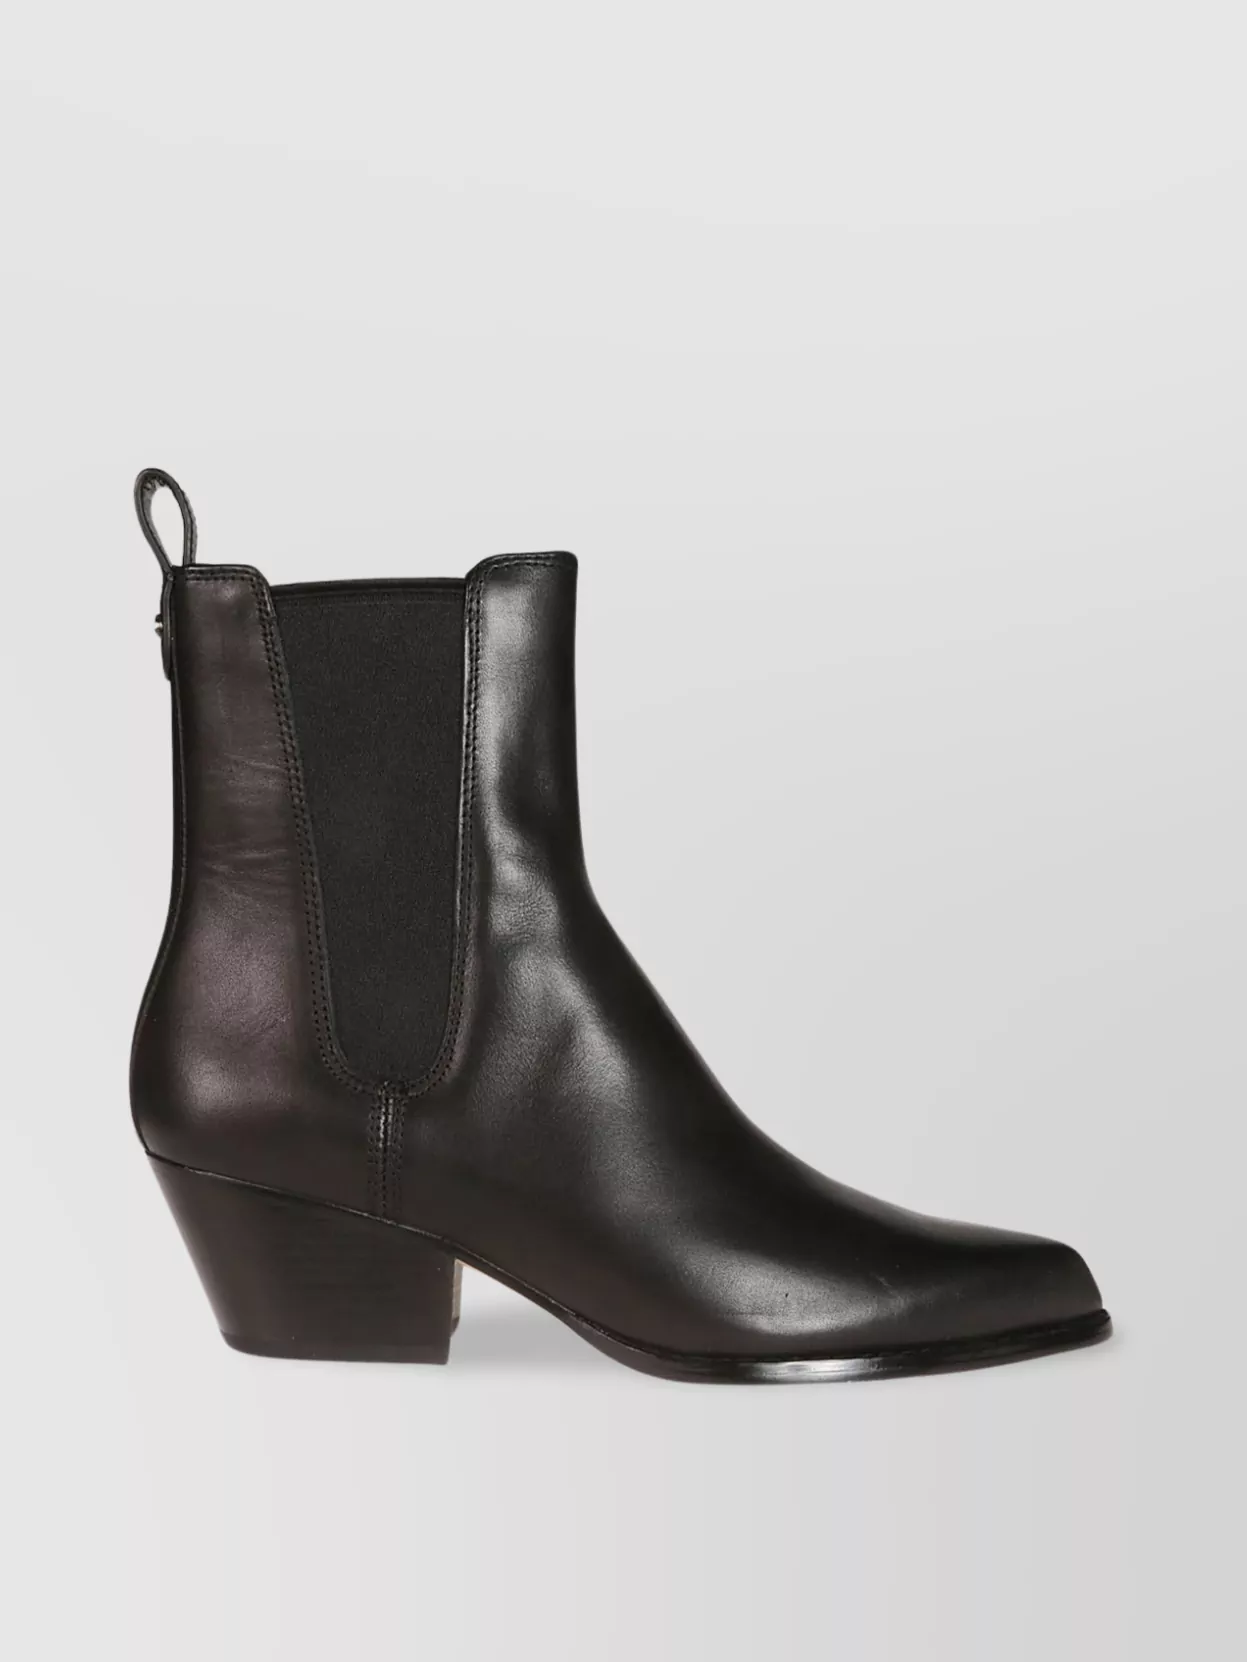 Shop Michael Kors Pointed Toe Stacked Heel Leather Boots